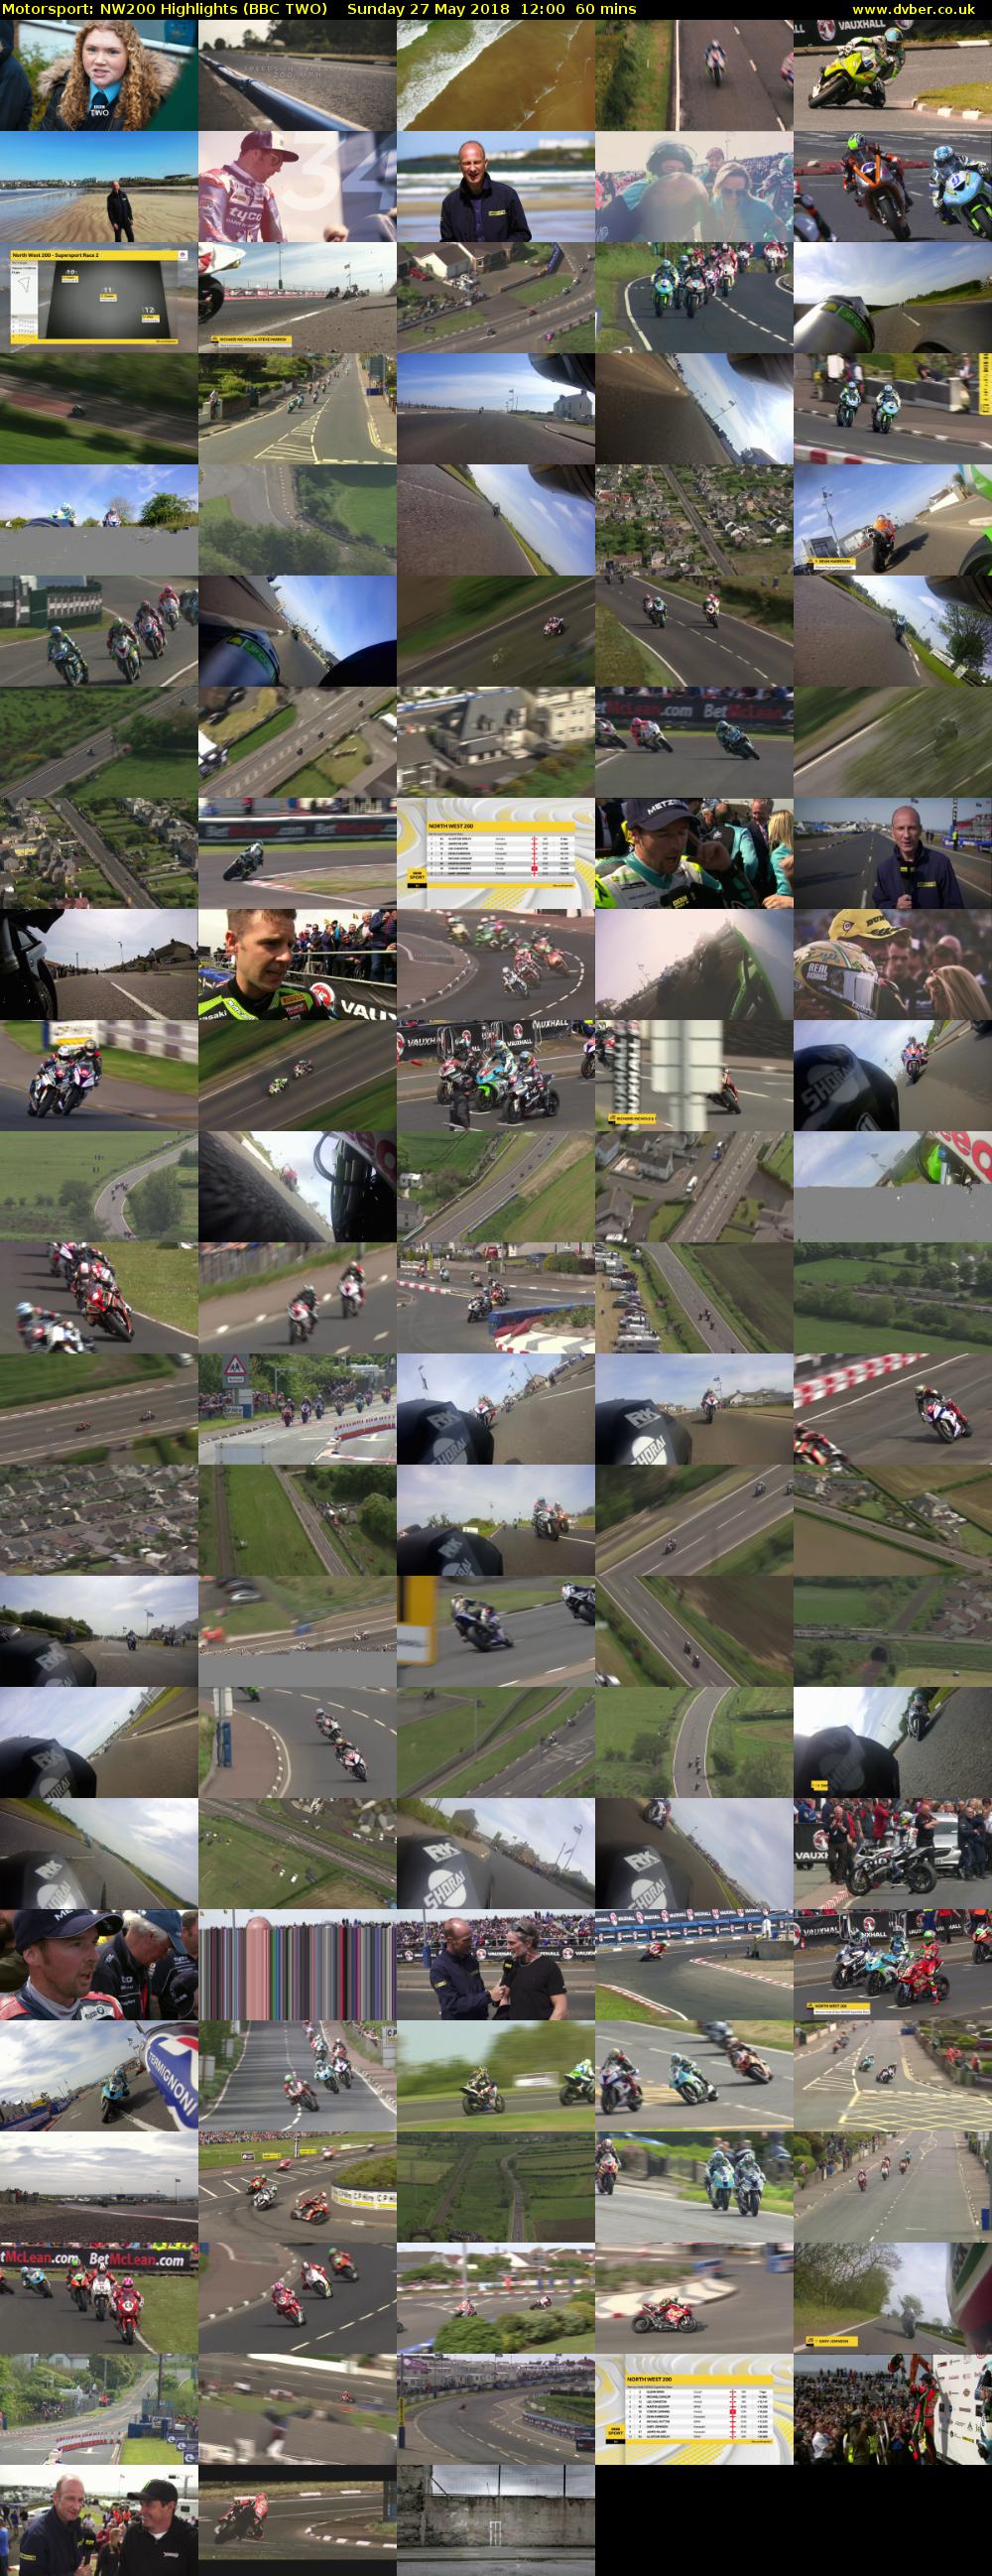 Motorsport: NW200 Highlights (BBC TWO) Sunday 27 May 2018 12:00 - 13:00